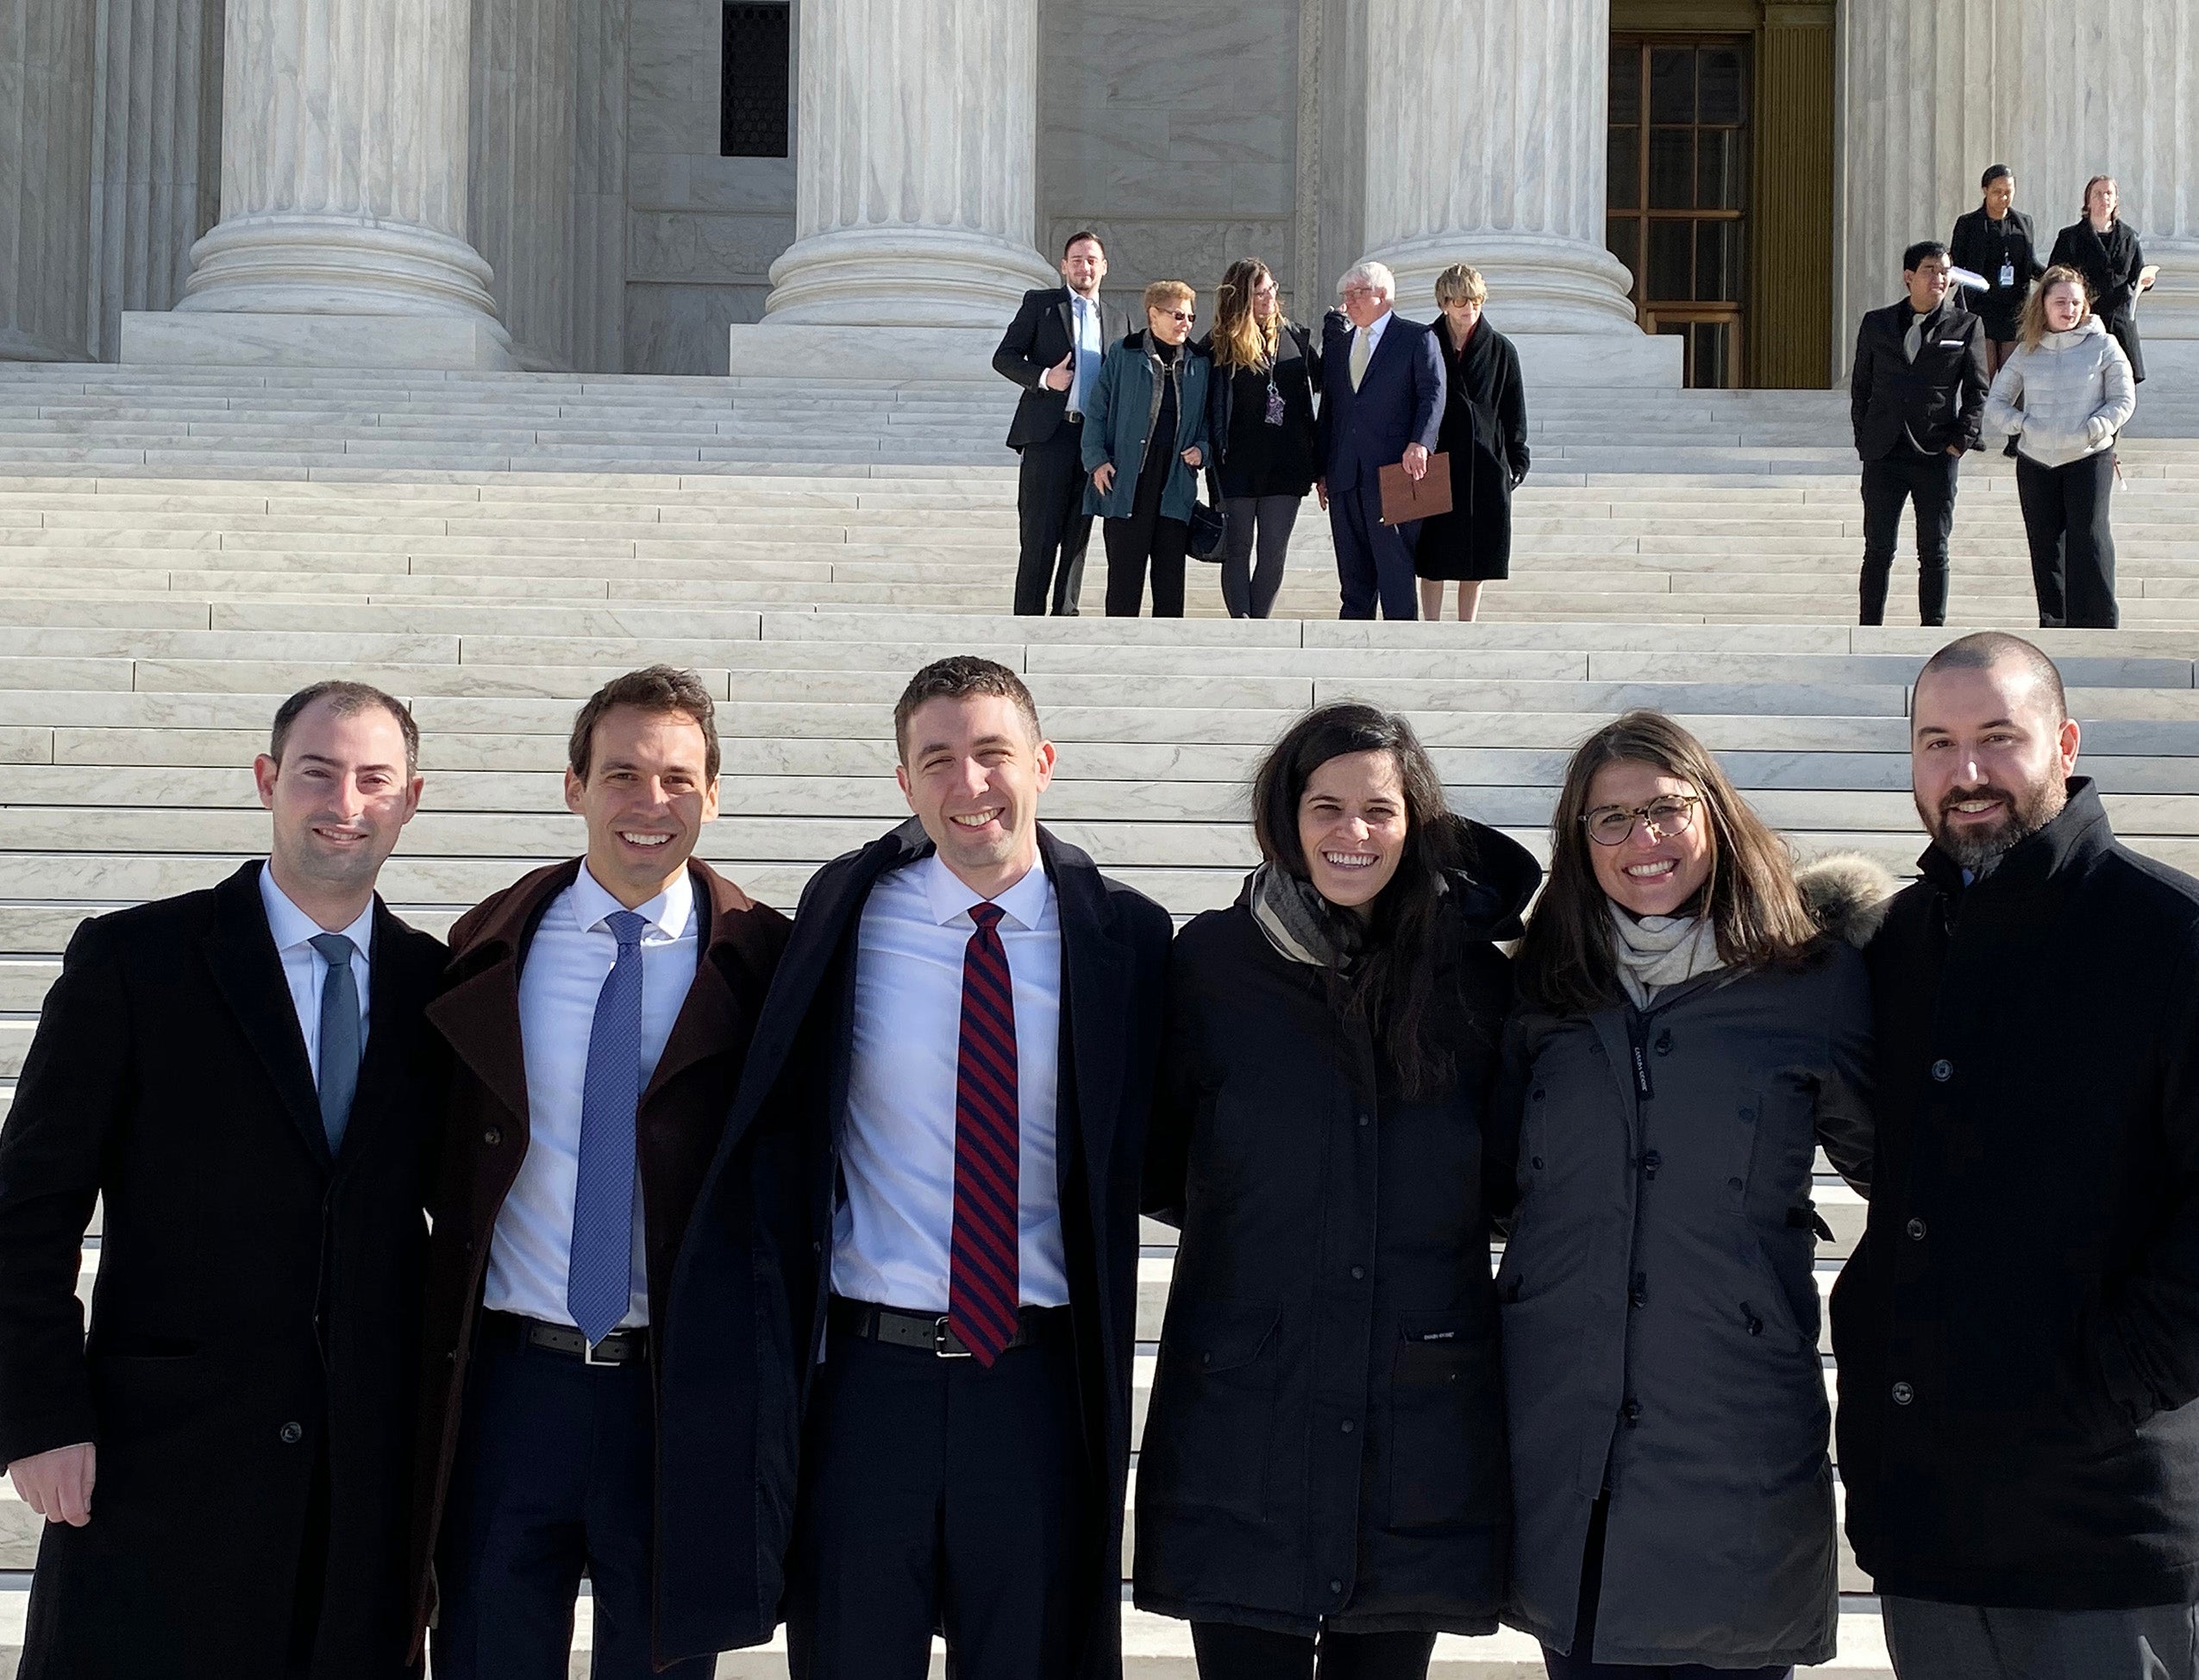 Group shot in front of the U.S. Supreme Court